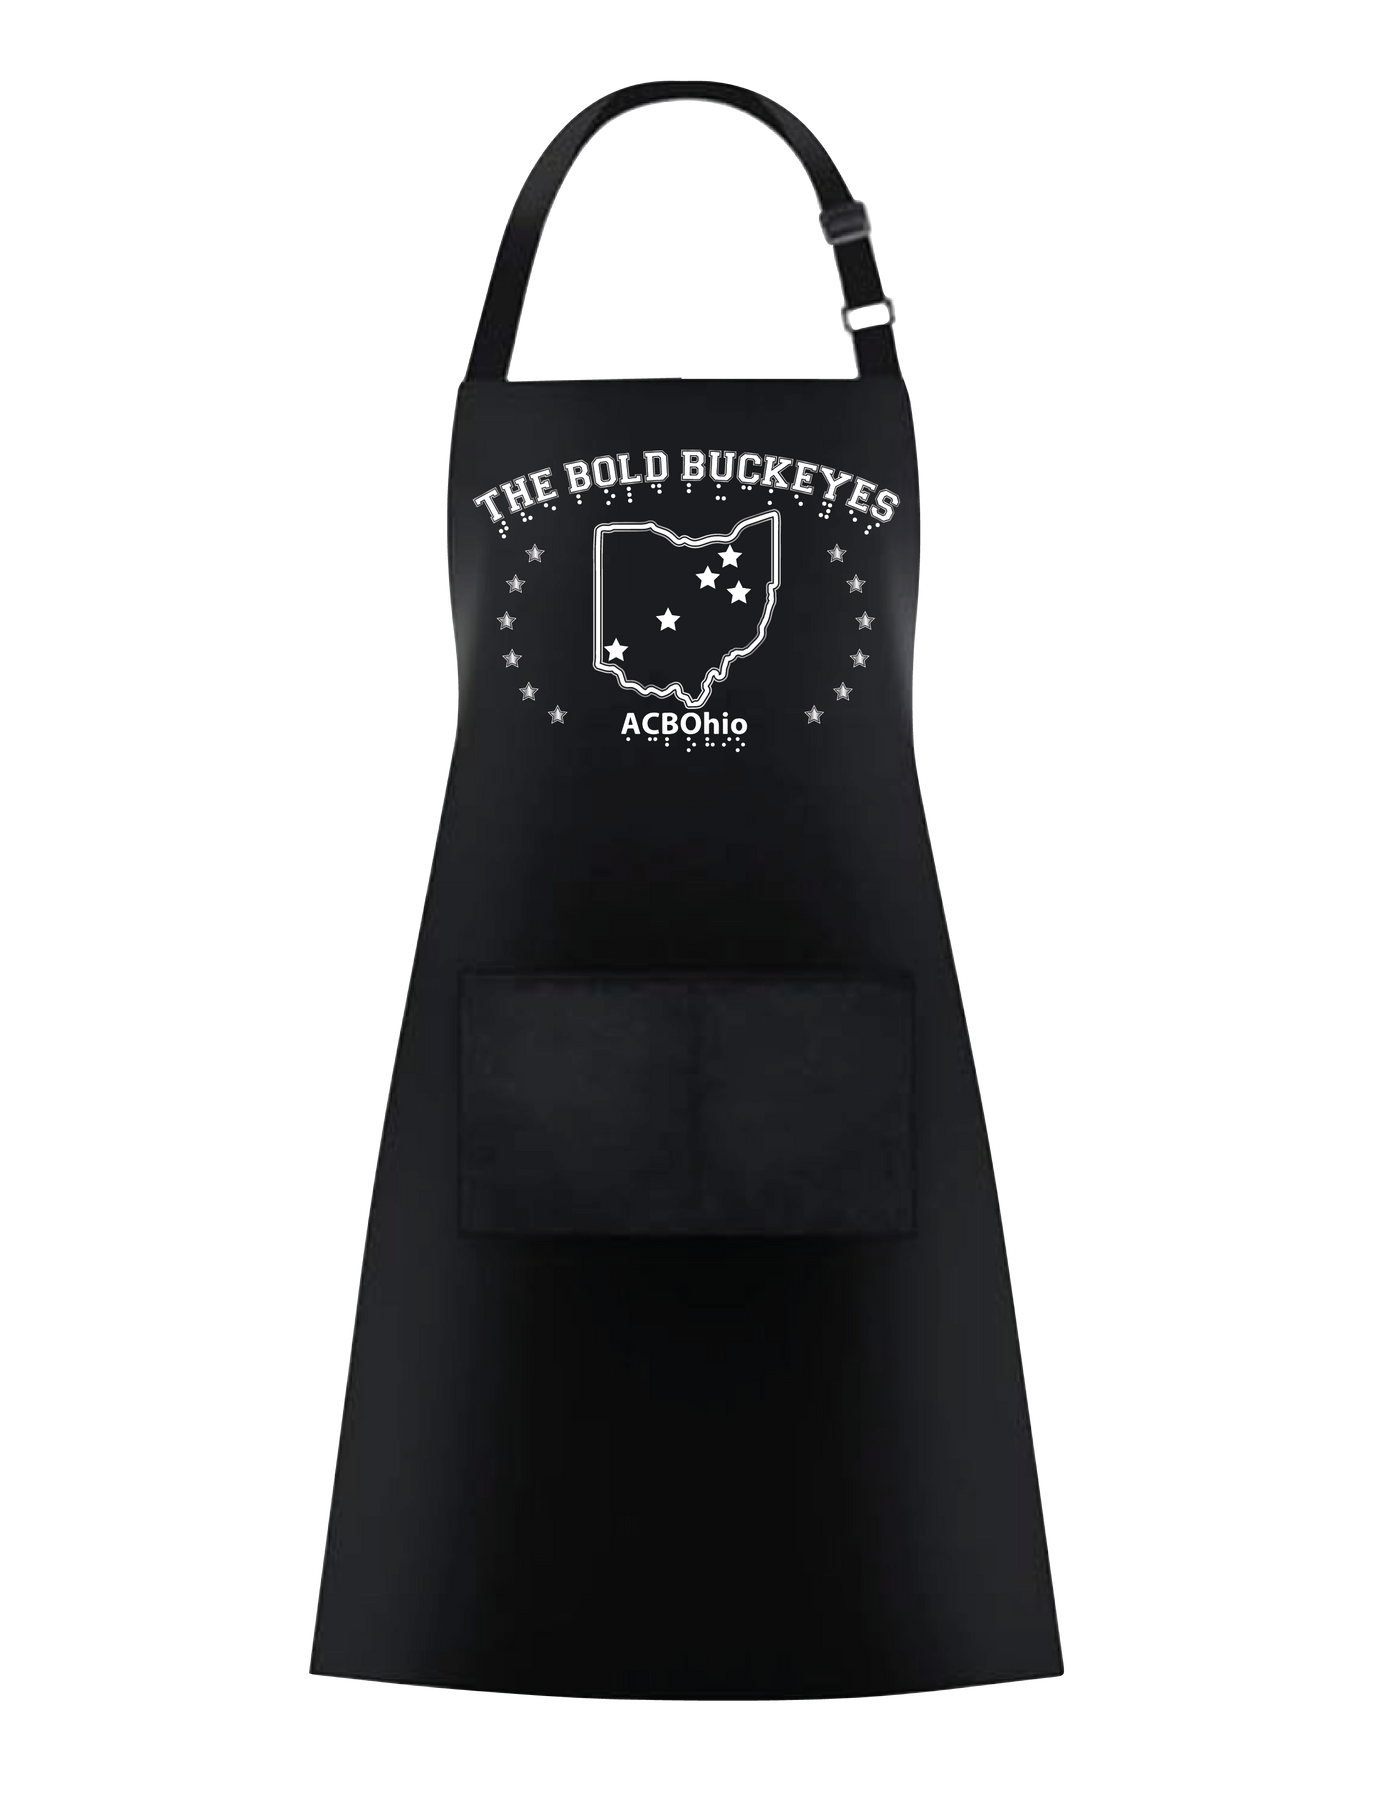 This is a black 37-inch heavy duty cotton apron with two big patch pockets on the front. The white print features the outline of the state of Ohio with six stars in a half circle on either side. There are five stars within the state outline marking cities within Ohio. Above the stars and state outline reads THE BOLD BUCKEYES with braille under each letter. Under the state and stars is ACB OHIO with braille under each letter.